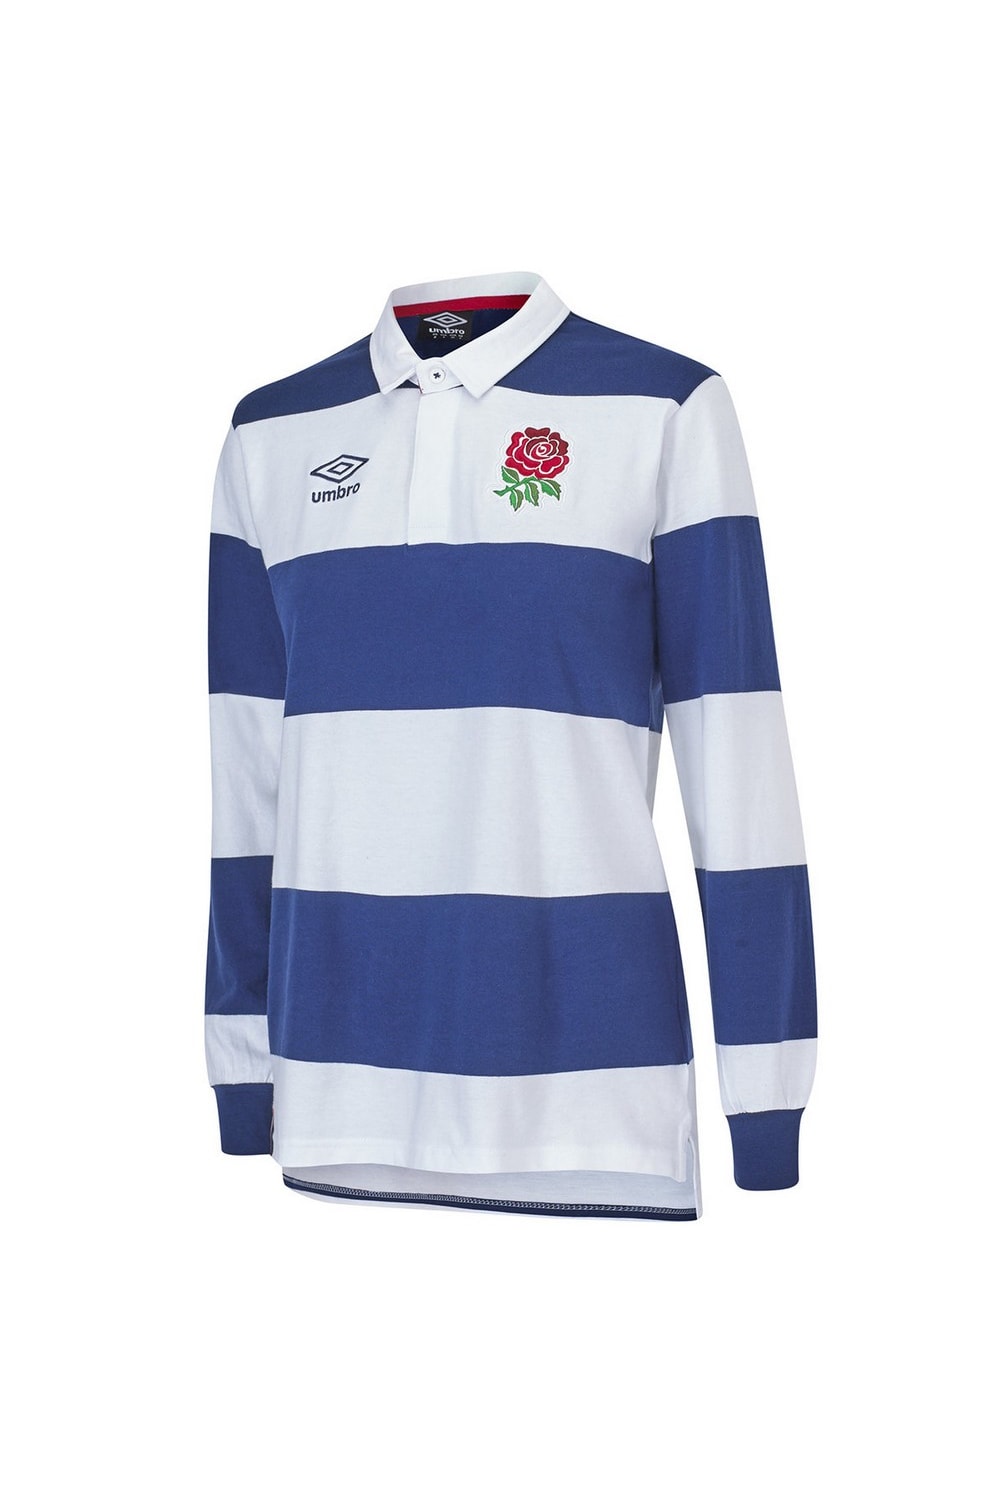 Umbro White/Navy England Rugby Womens/Ladies Classic Rugby Jersey